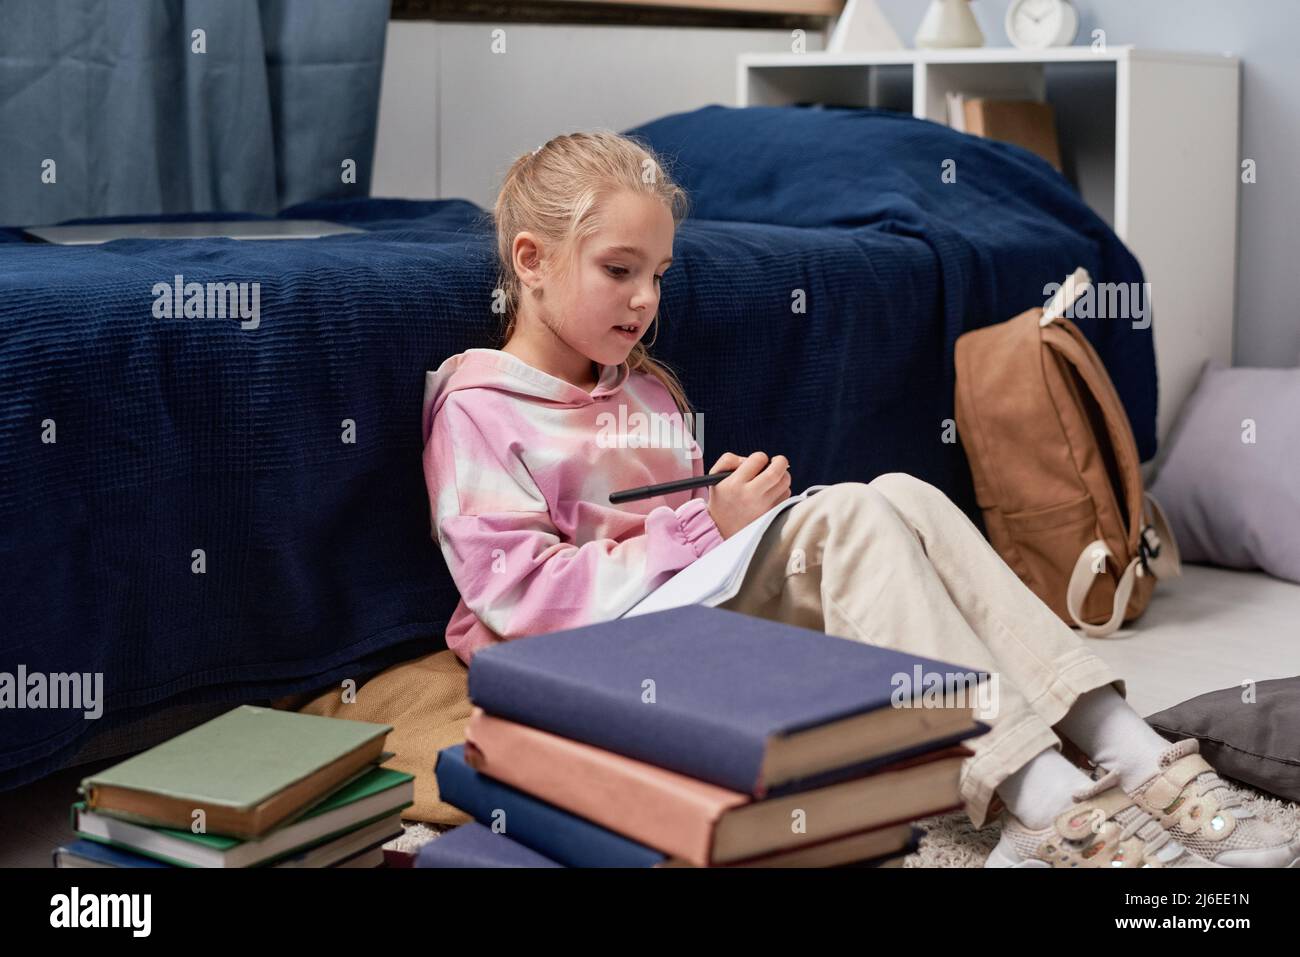 Blond-haired girl in hoodie with abstract pattern sitting at bed and reading notes while preparing for school test Stock Photo